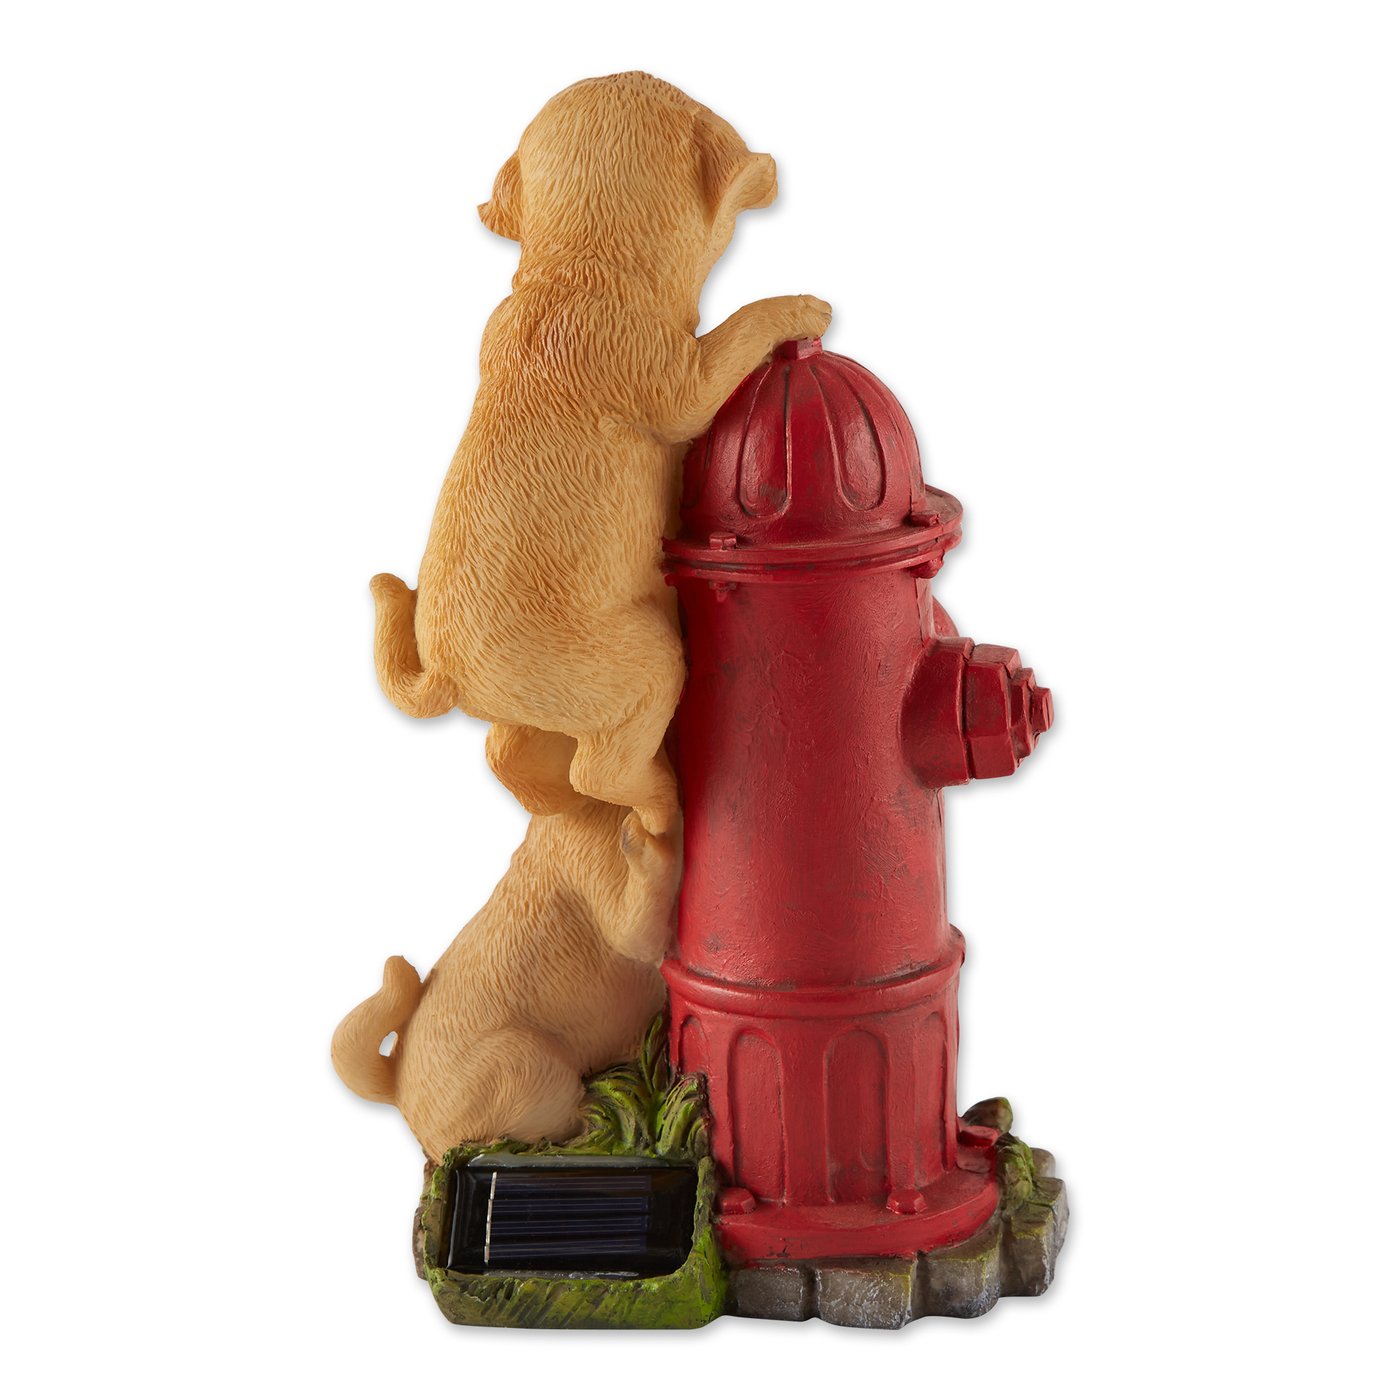 Dogs And Fire Hydrant Solar Statue